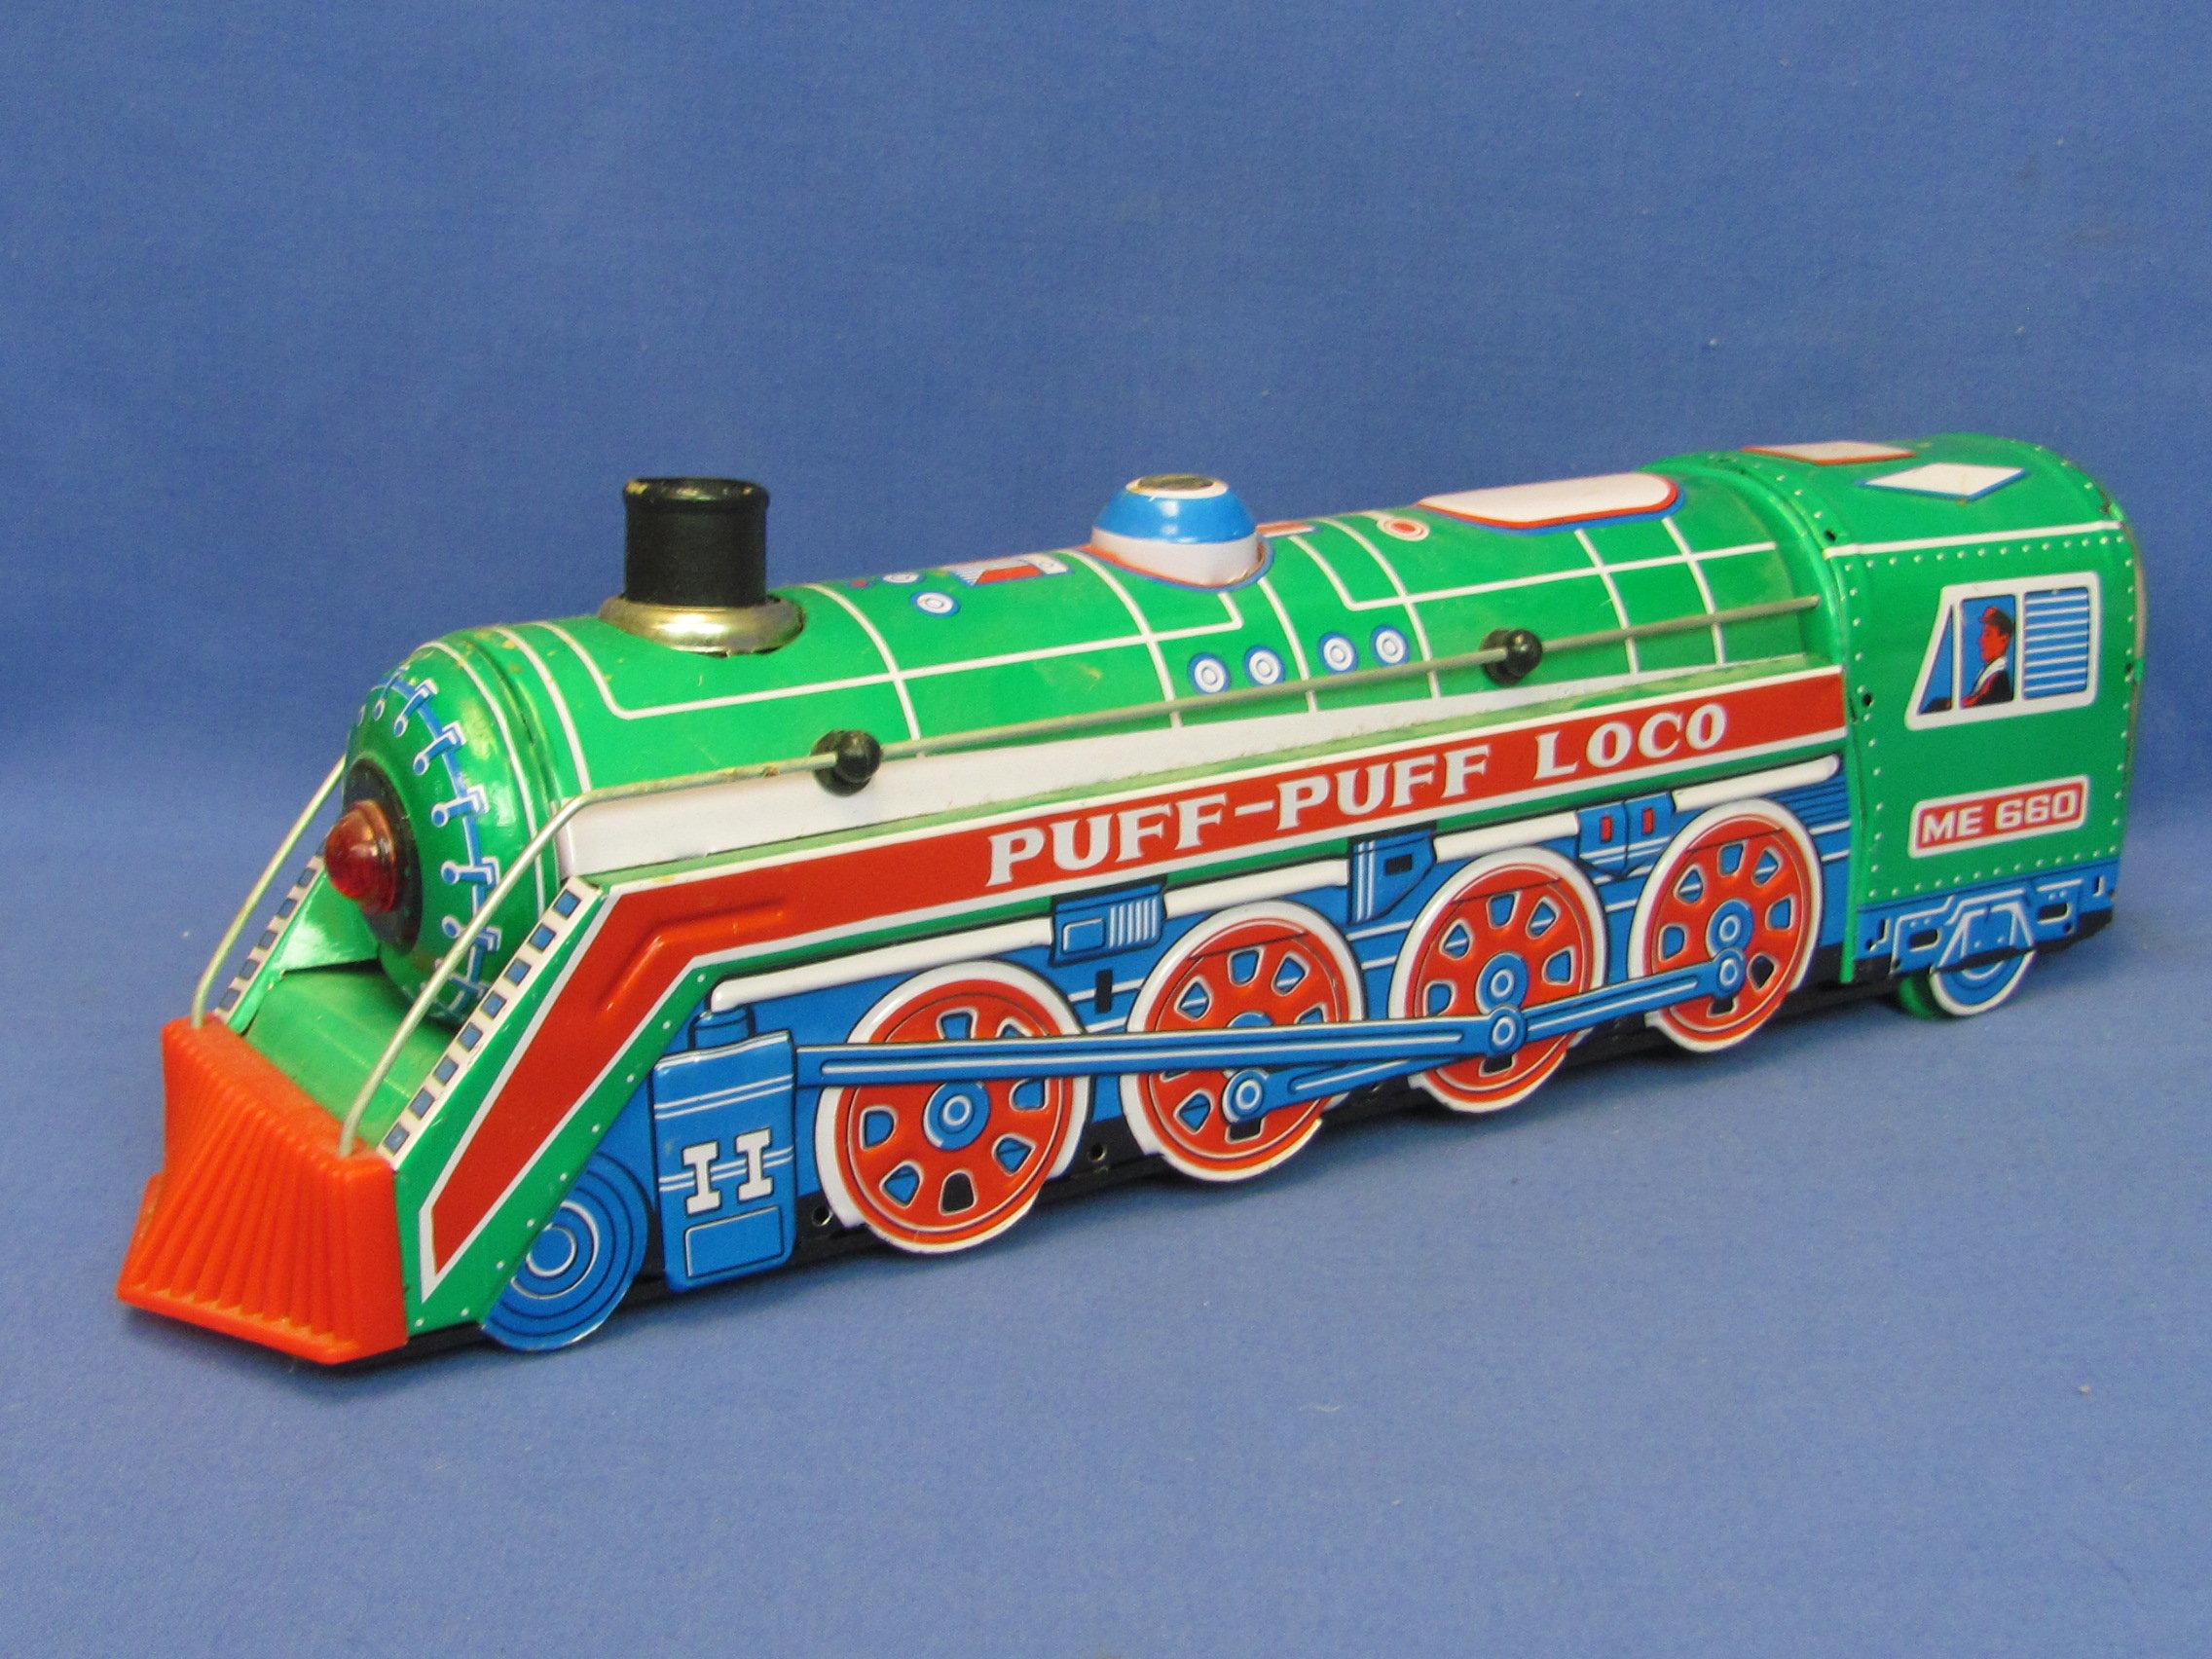 Puff-Puff Loco - Battery Operated Tin Litho – Works – 15 3/4” long – Makes Noise, Moves, etc..